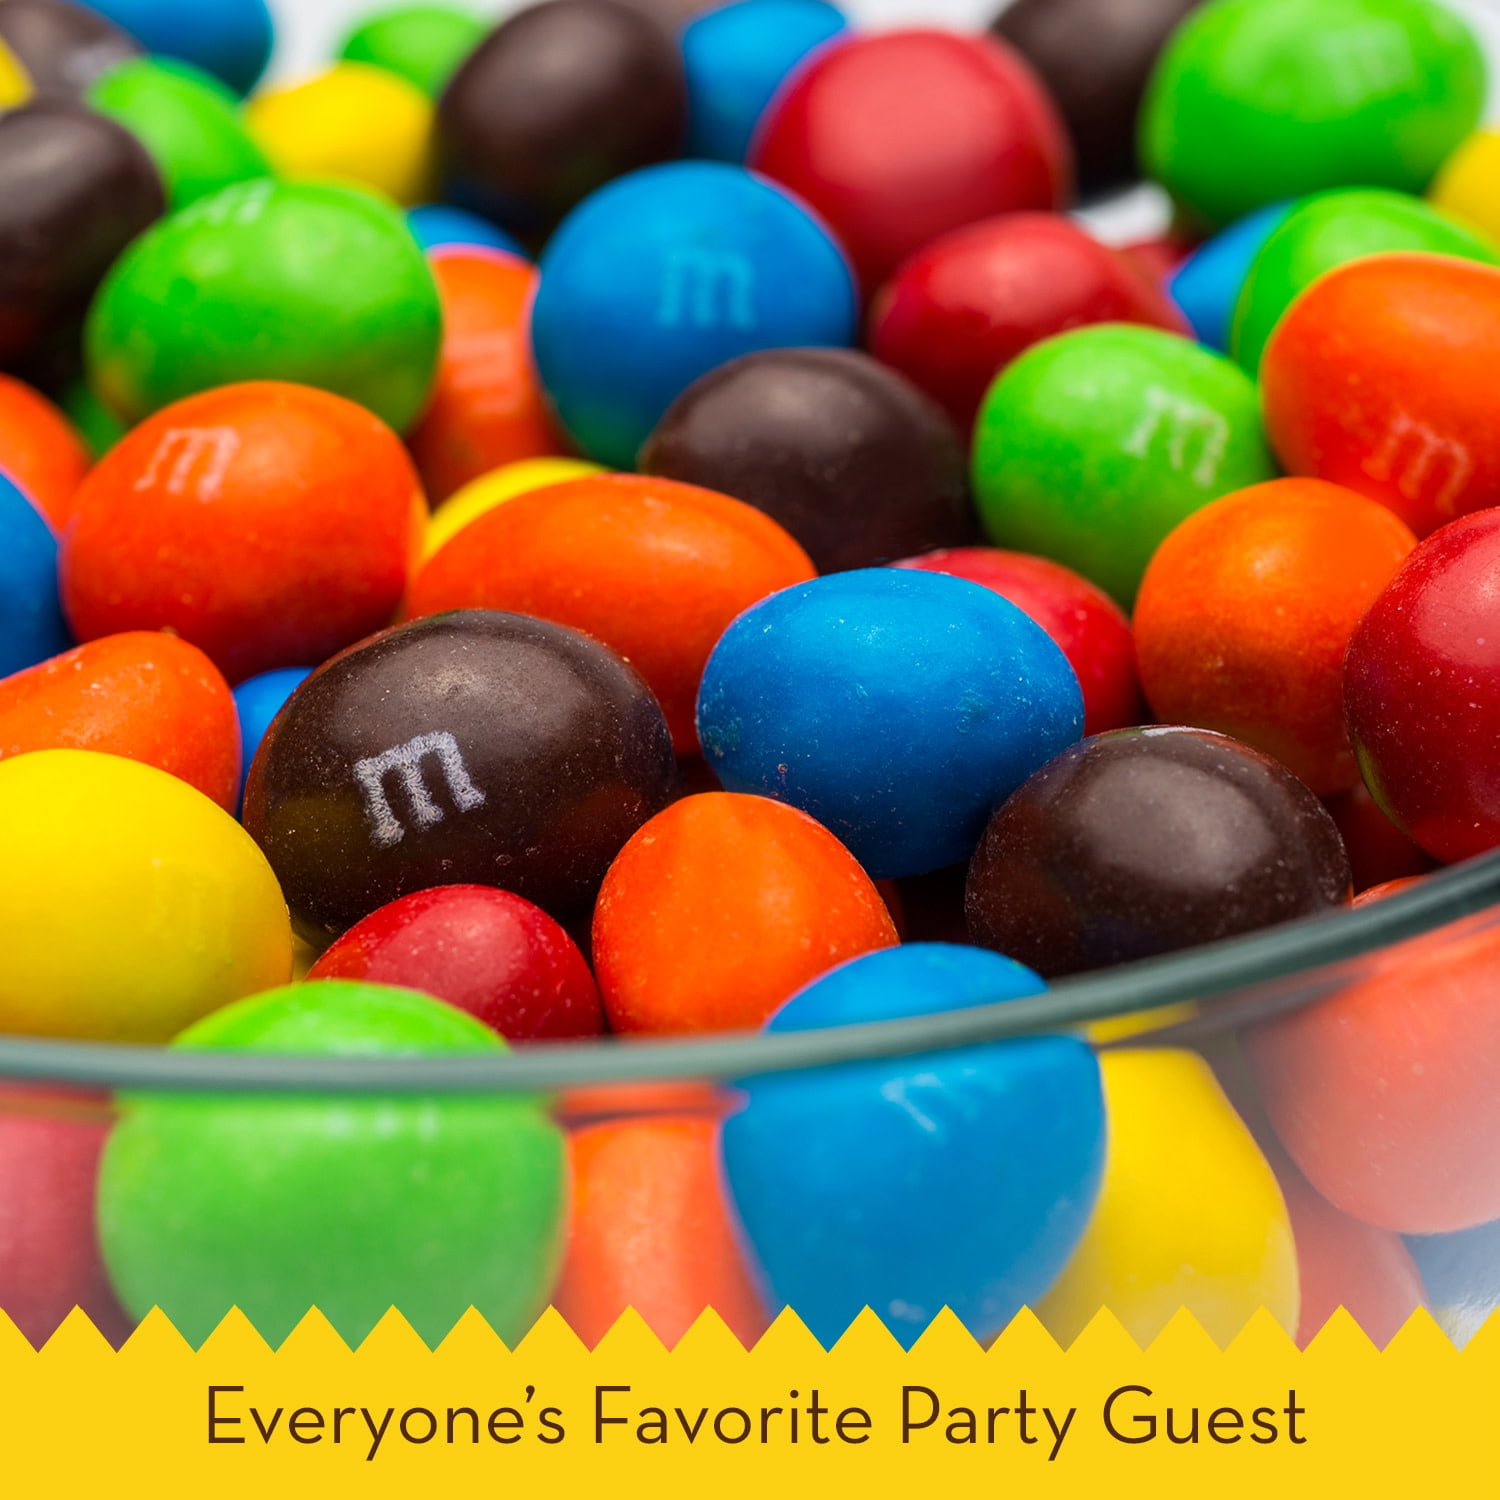 M&M's Family Size Milk Chocolate … curated on LTK